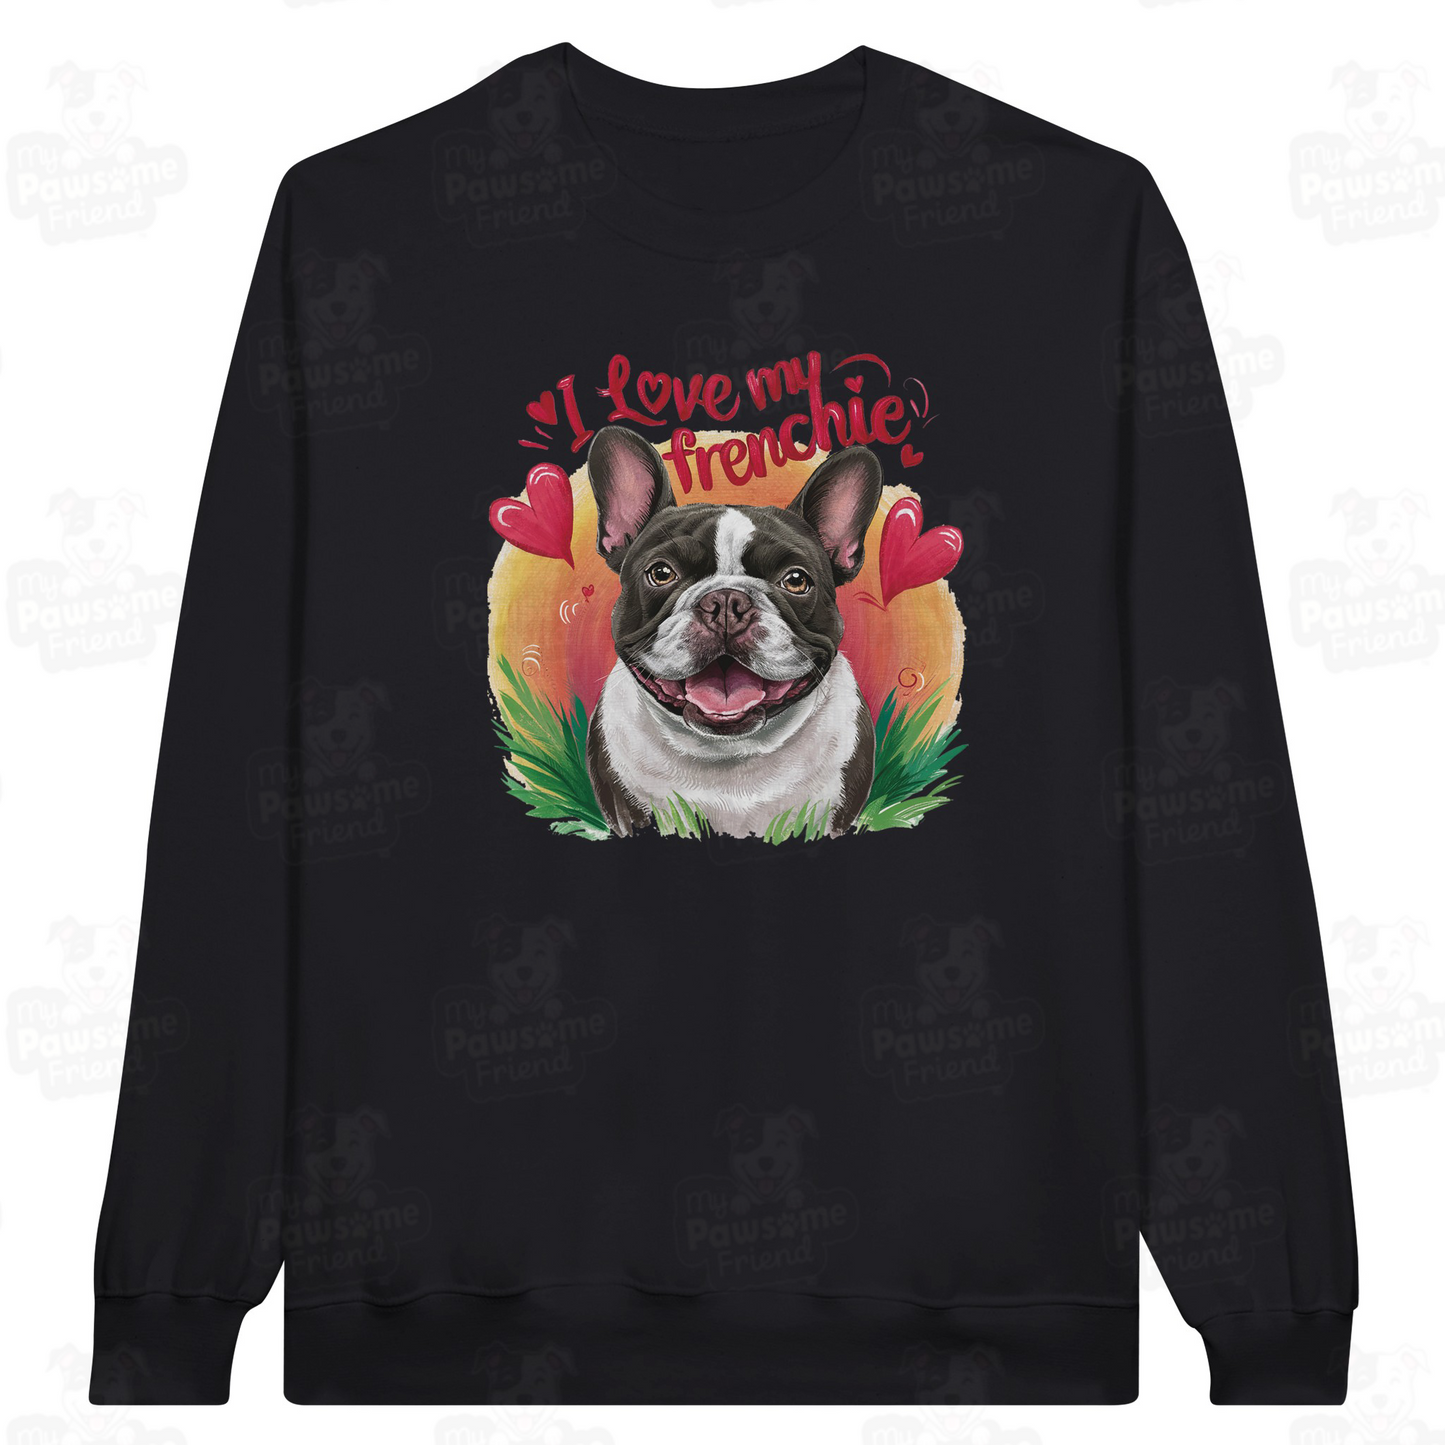 An unisex sweatshirt with a cute design featuring a french bulldog smiling surrounded by heart designs, and the phrase "I love my Frenchie". The color of the unisex sweatshirt is black